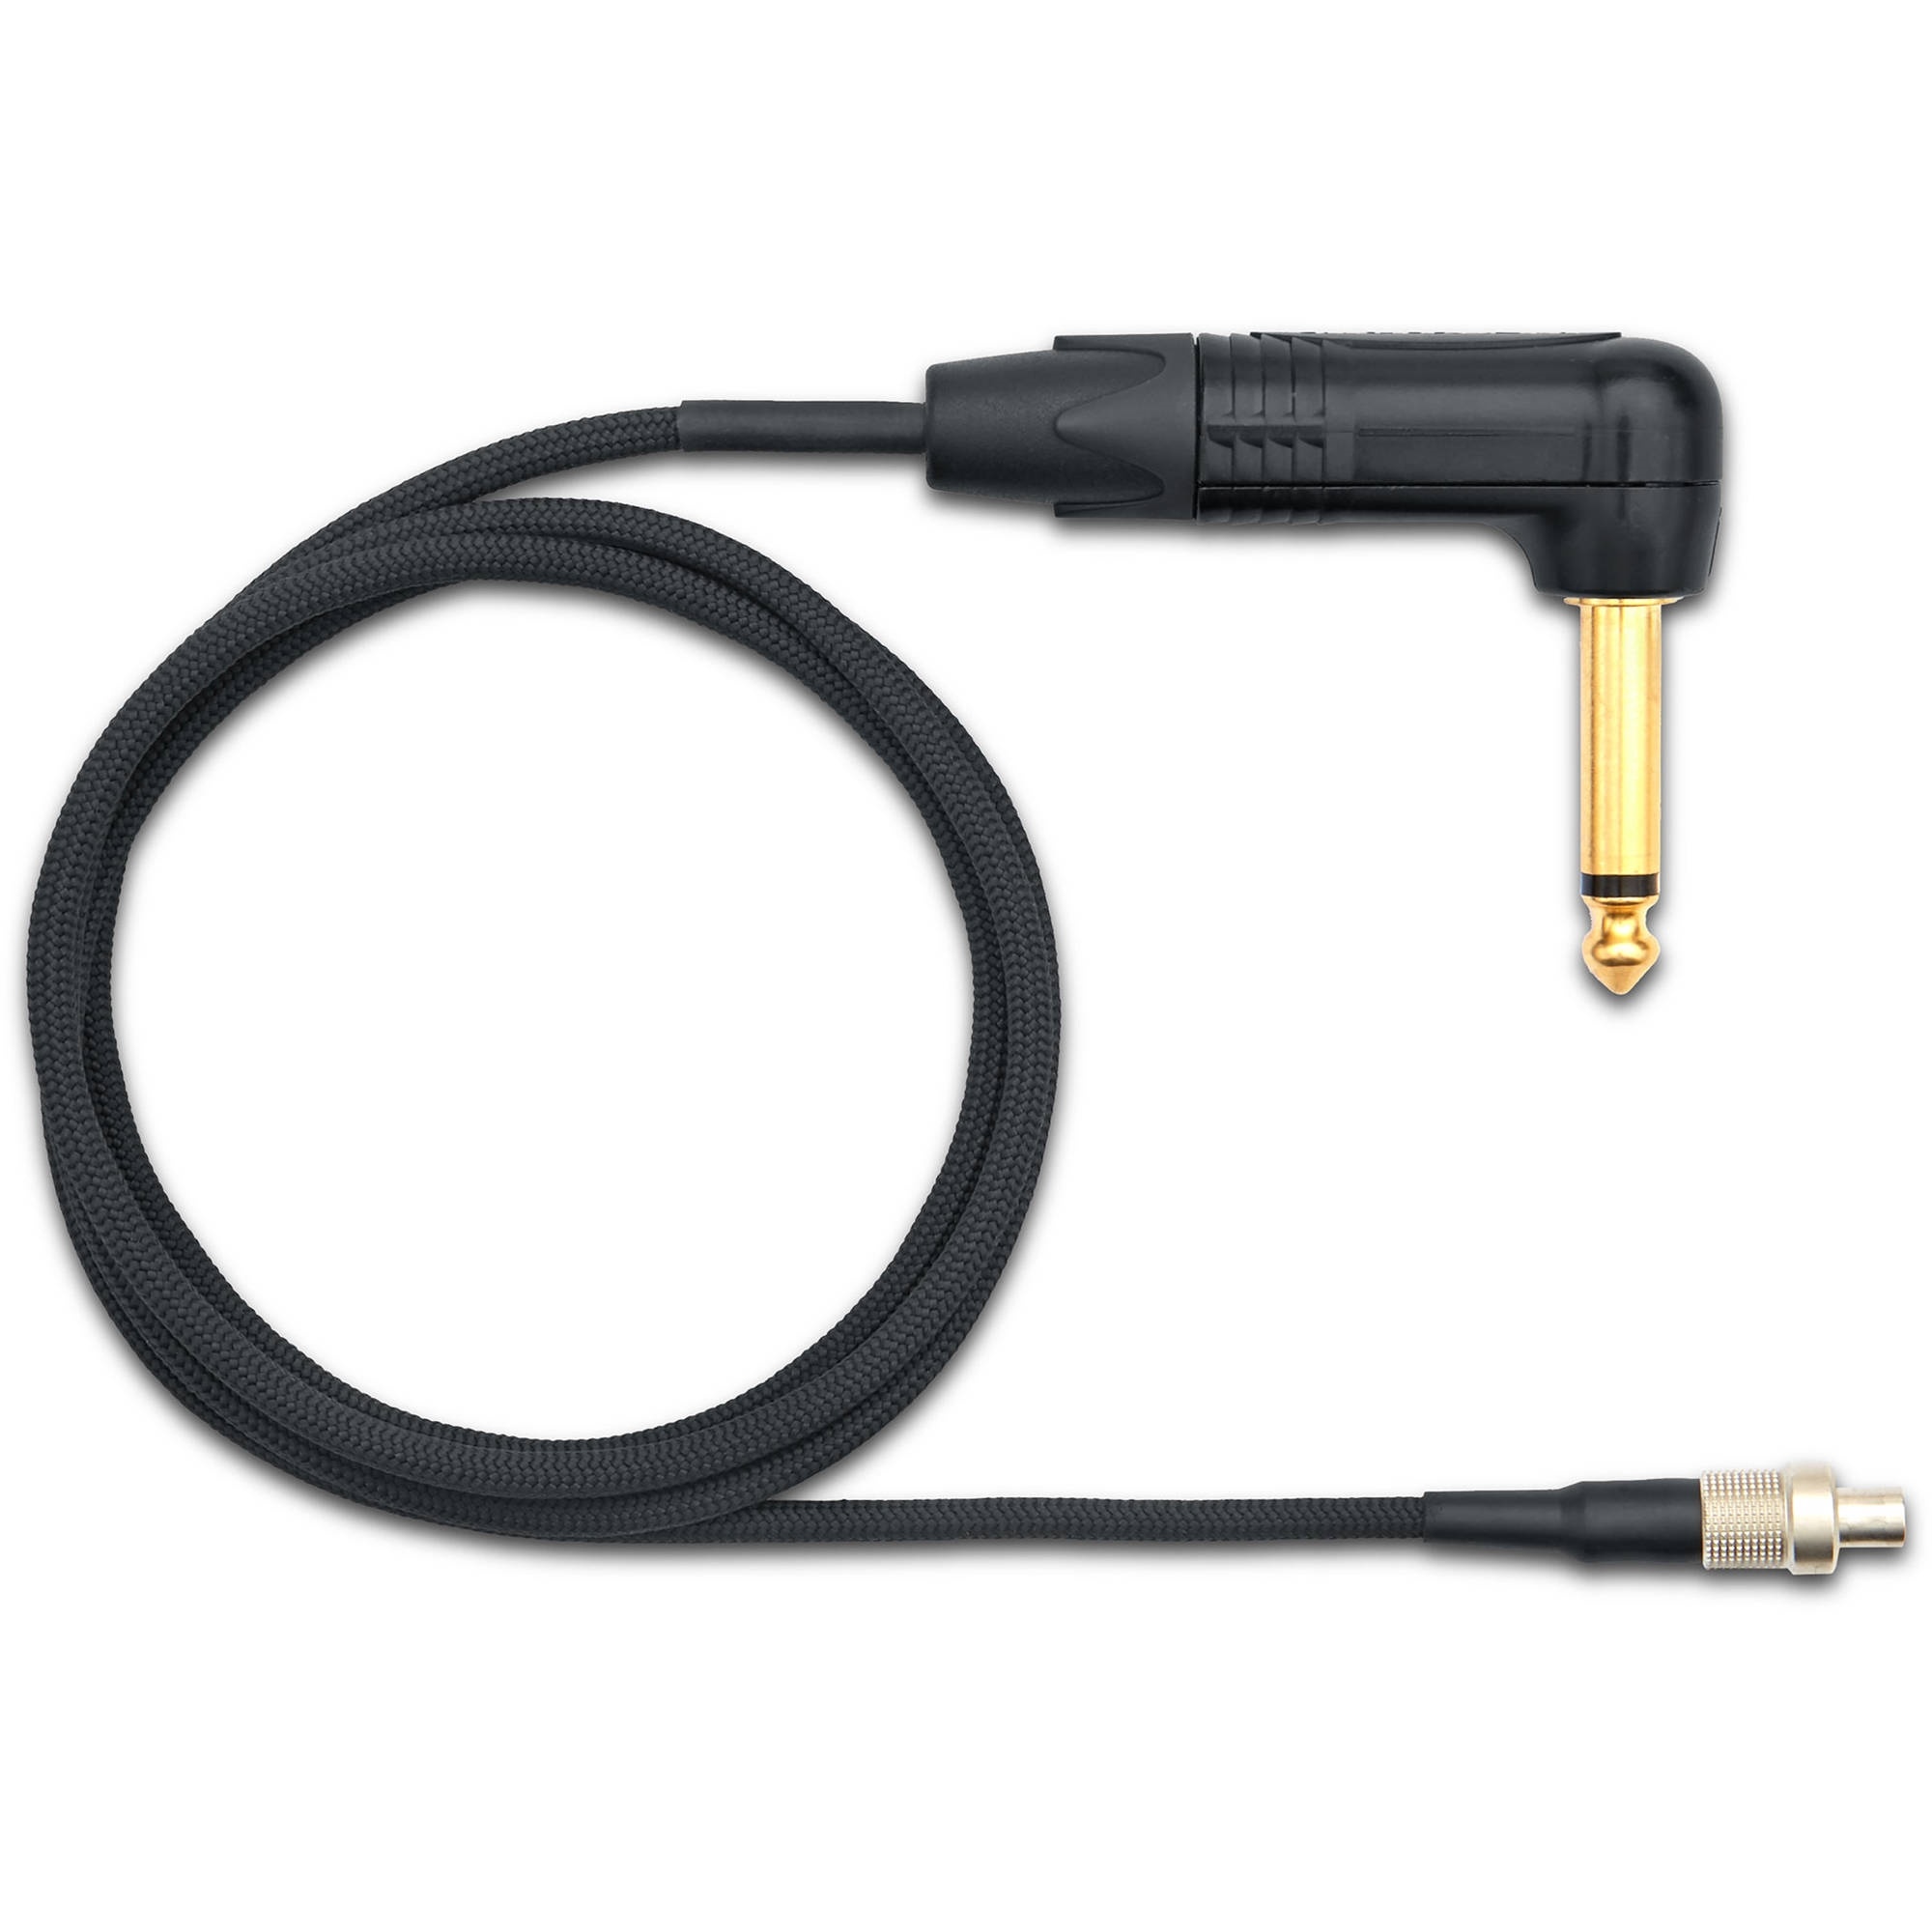 Shure WA309 Instrument Cable for ADX1M Micro Bodypack Transmitter (Right-Angle 1/4" Connector)